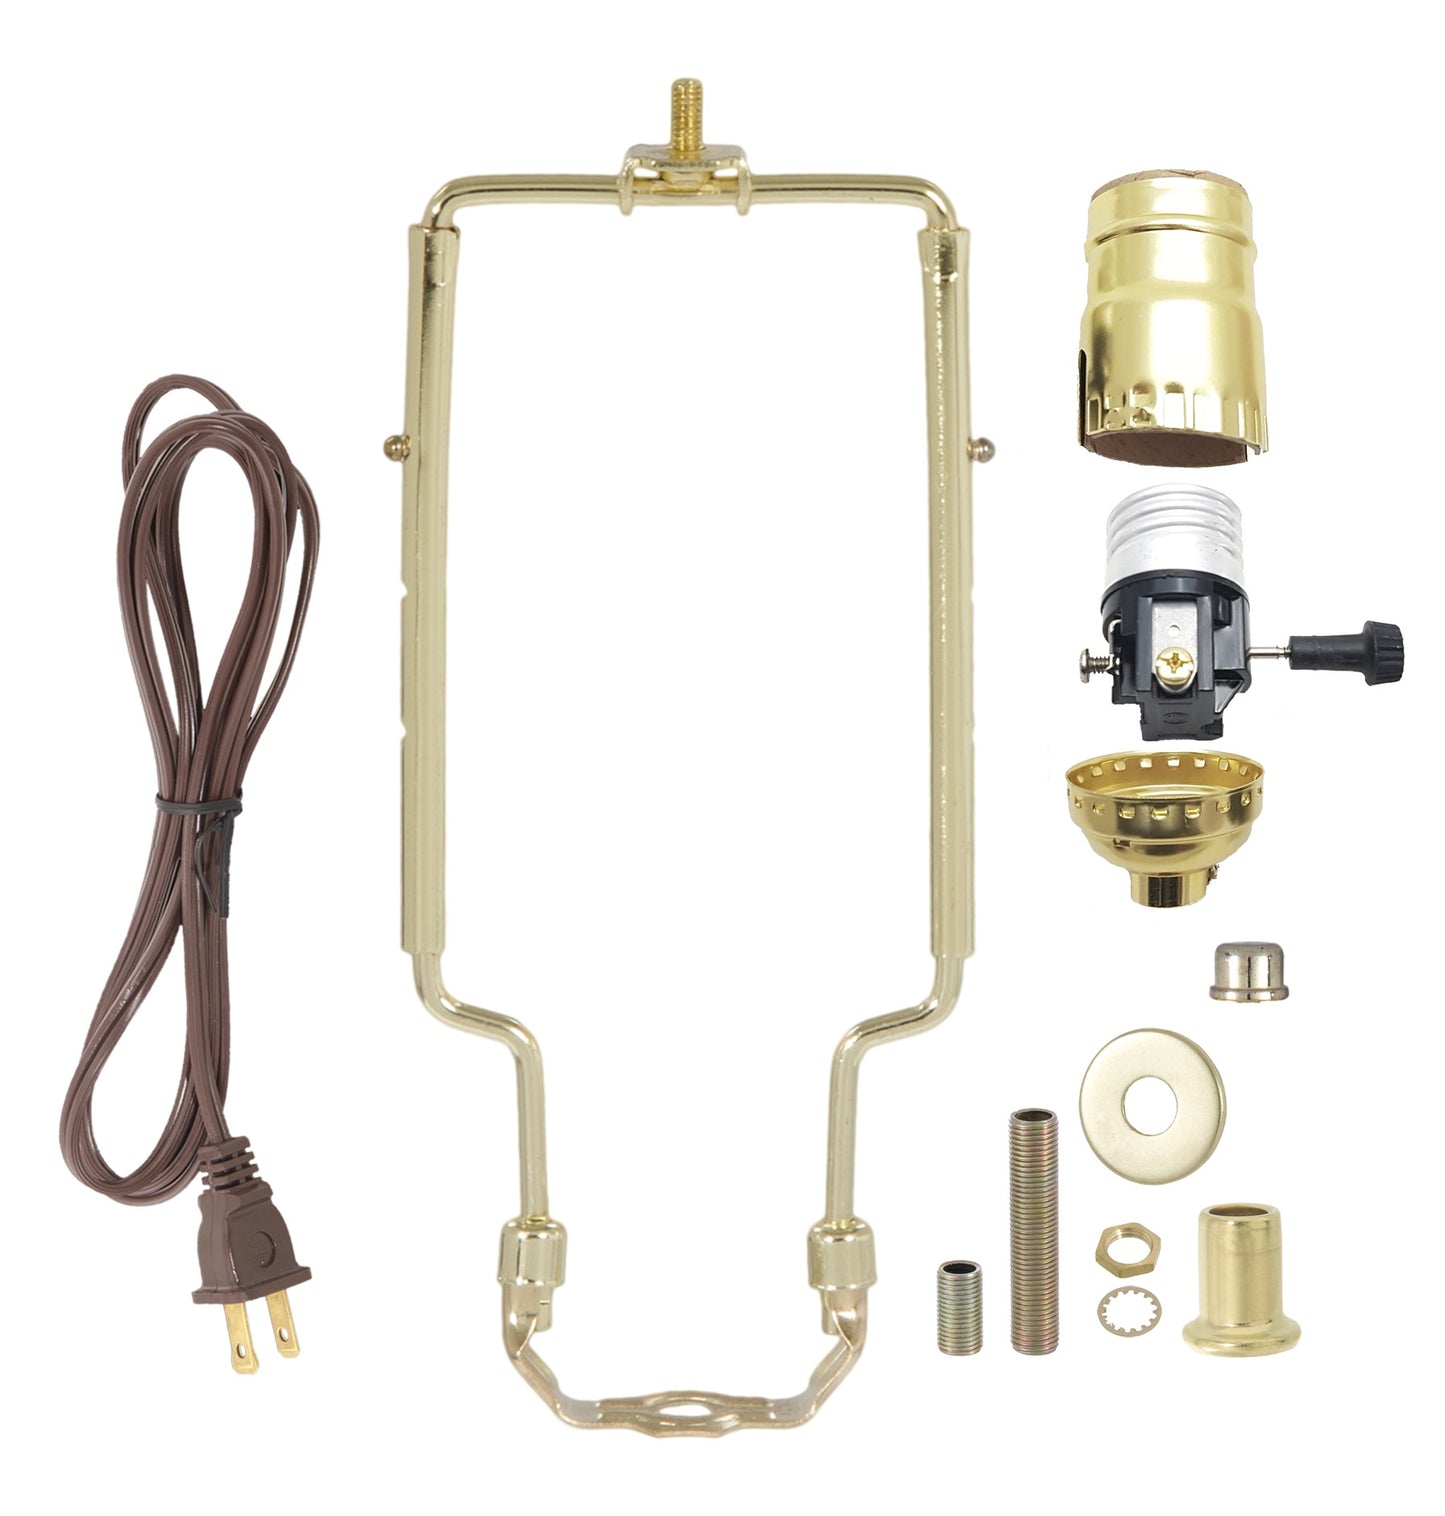 Table Lamp Wiring Kit with Turn Knob Socket, Adjustable Harp, and Brass Plated Finish